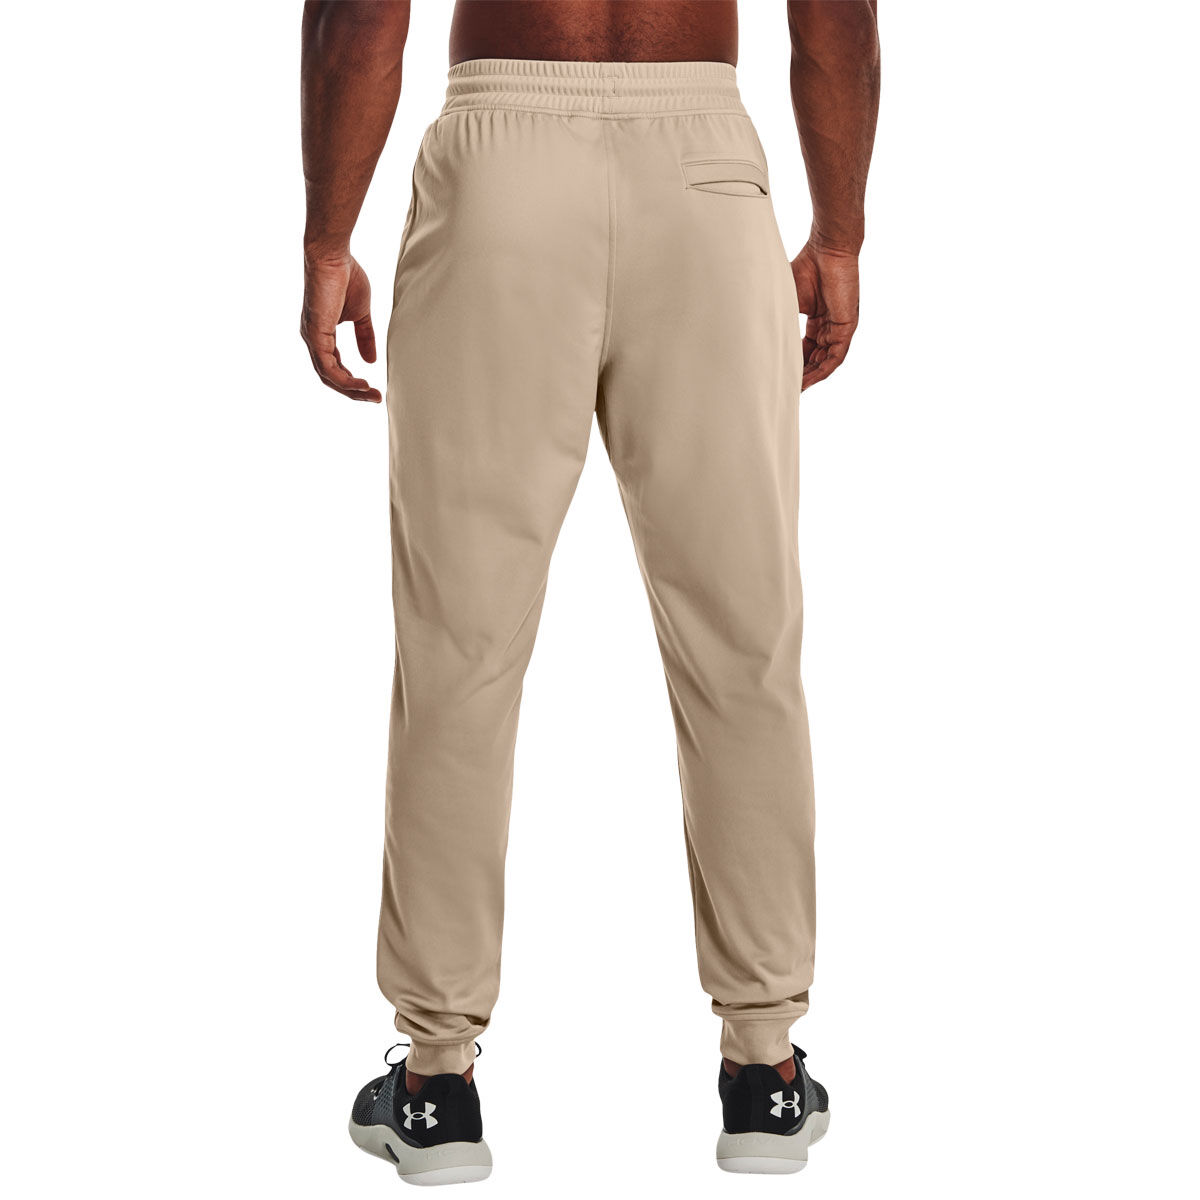 Under Armour Mens Sportstyle Tricot Track Pants Beige XXL